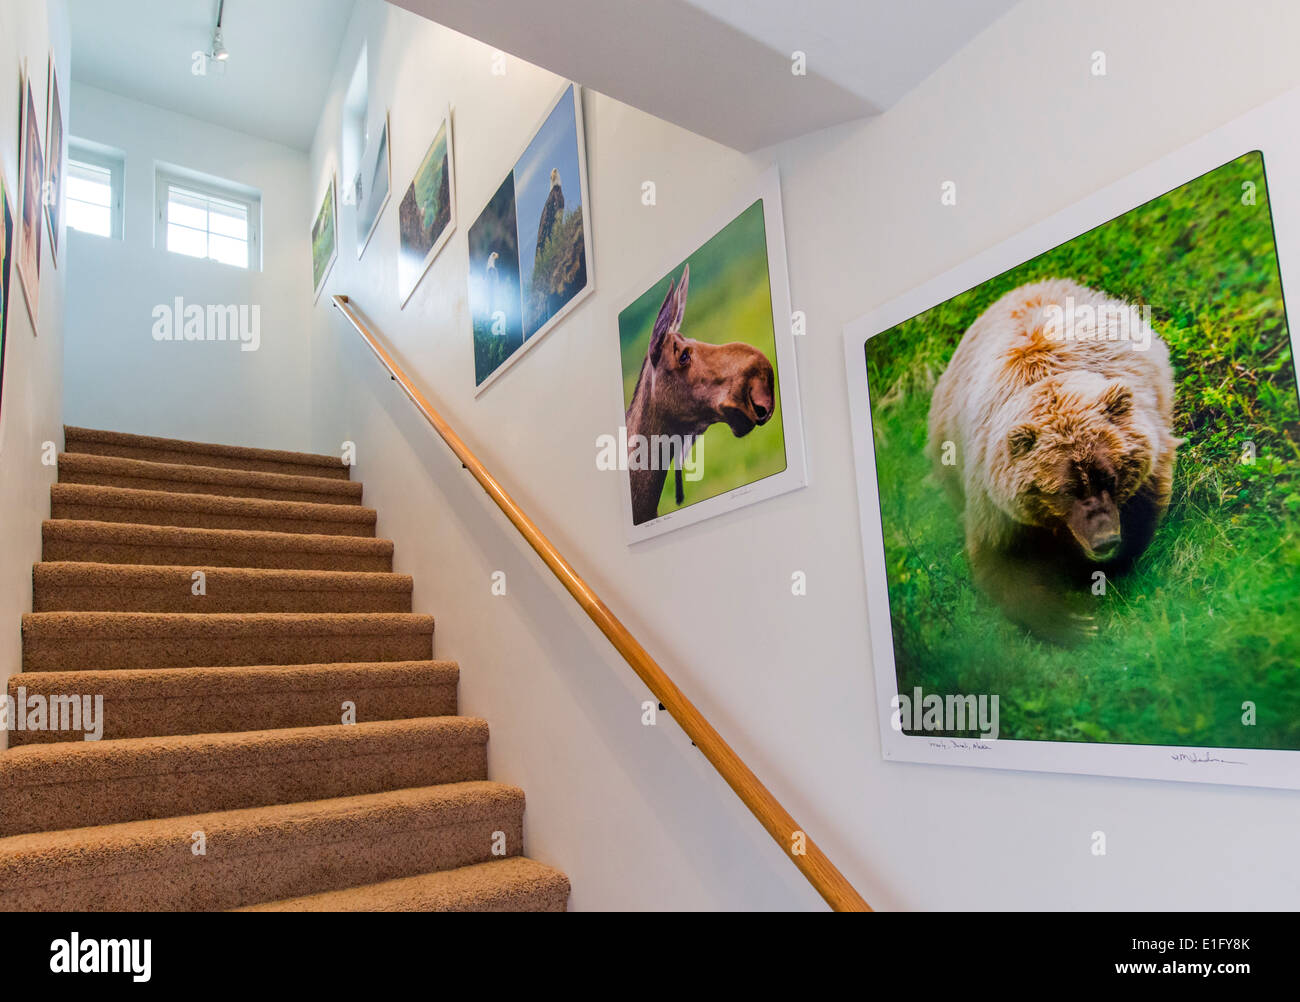 Office stairway decorated with fine art Gicleé photographic prints Stock Photo